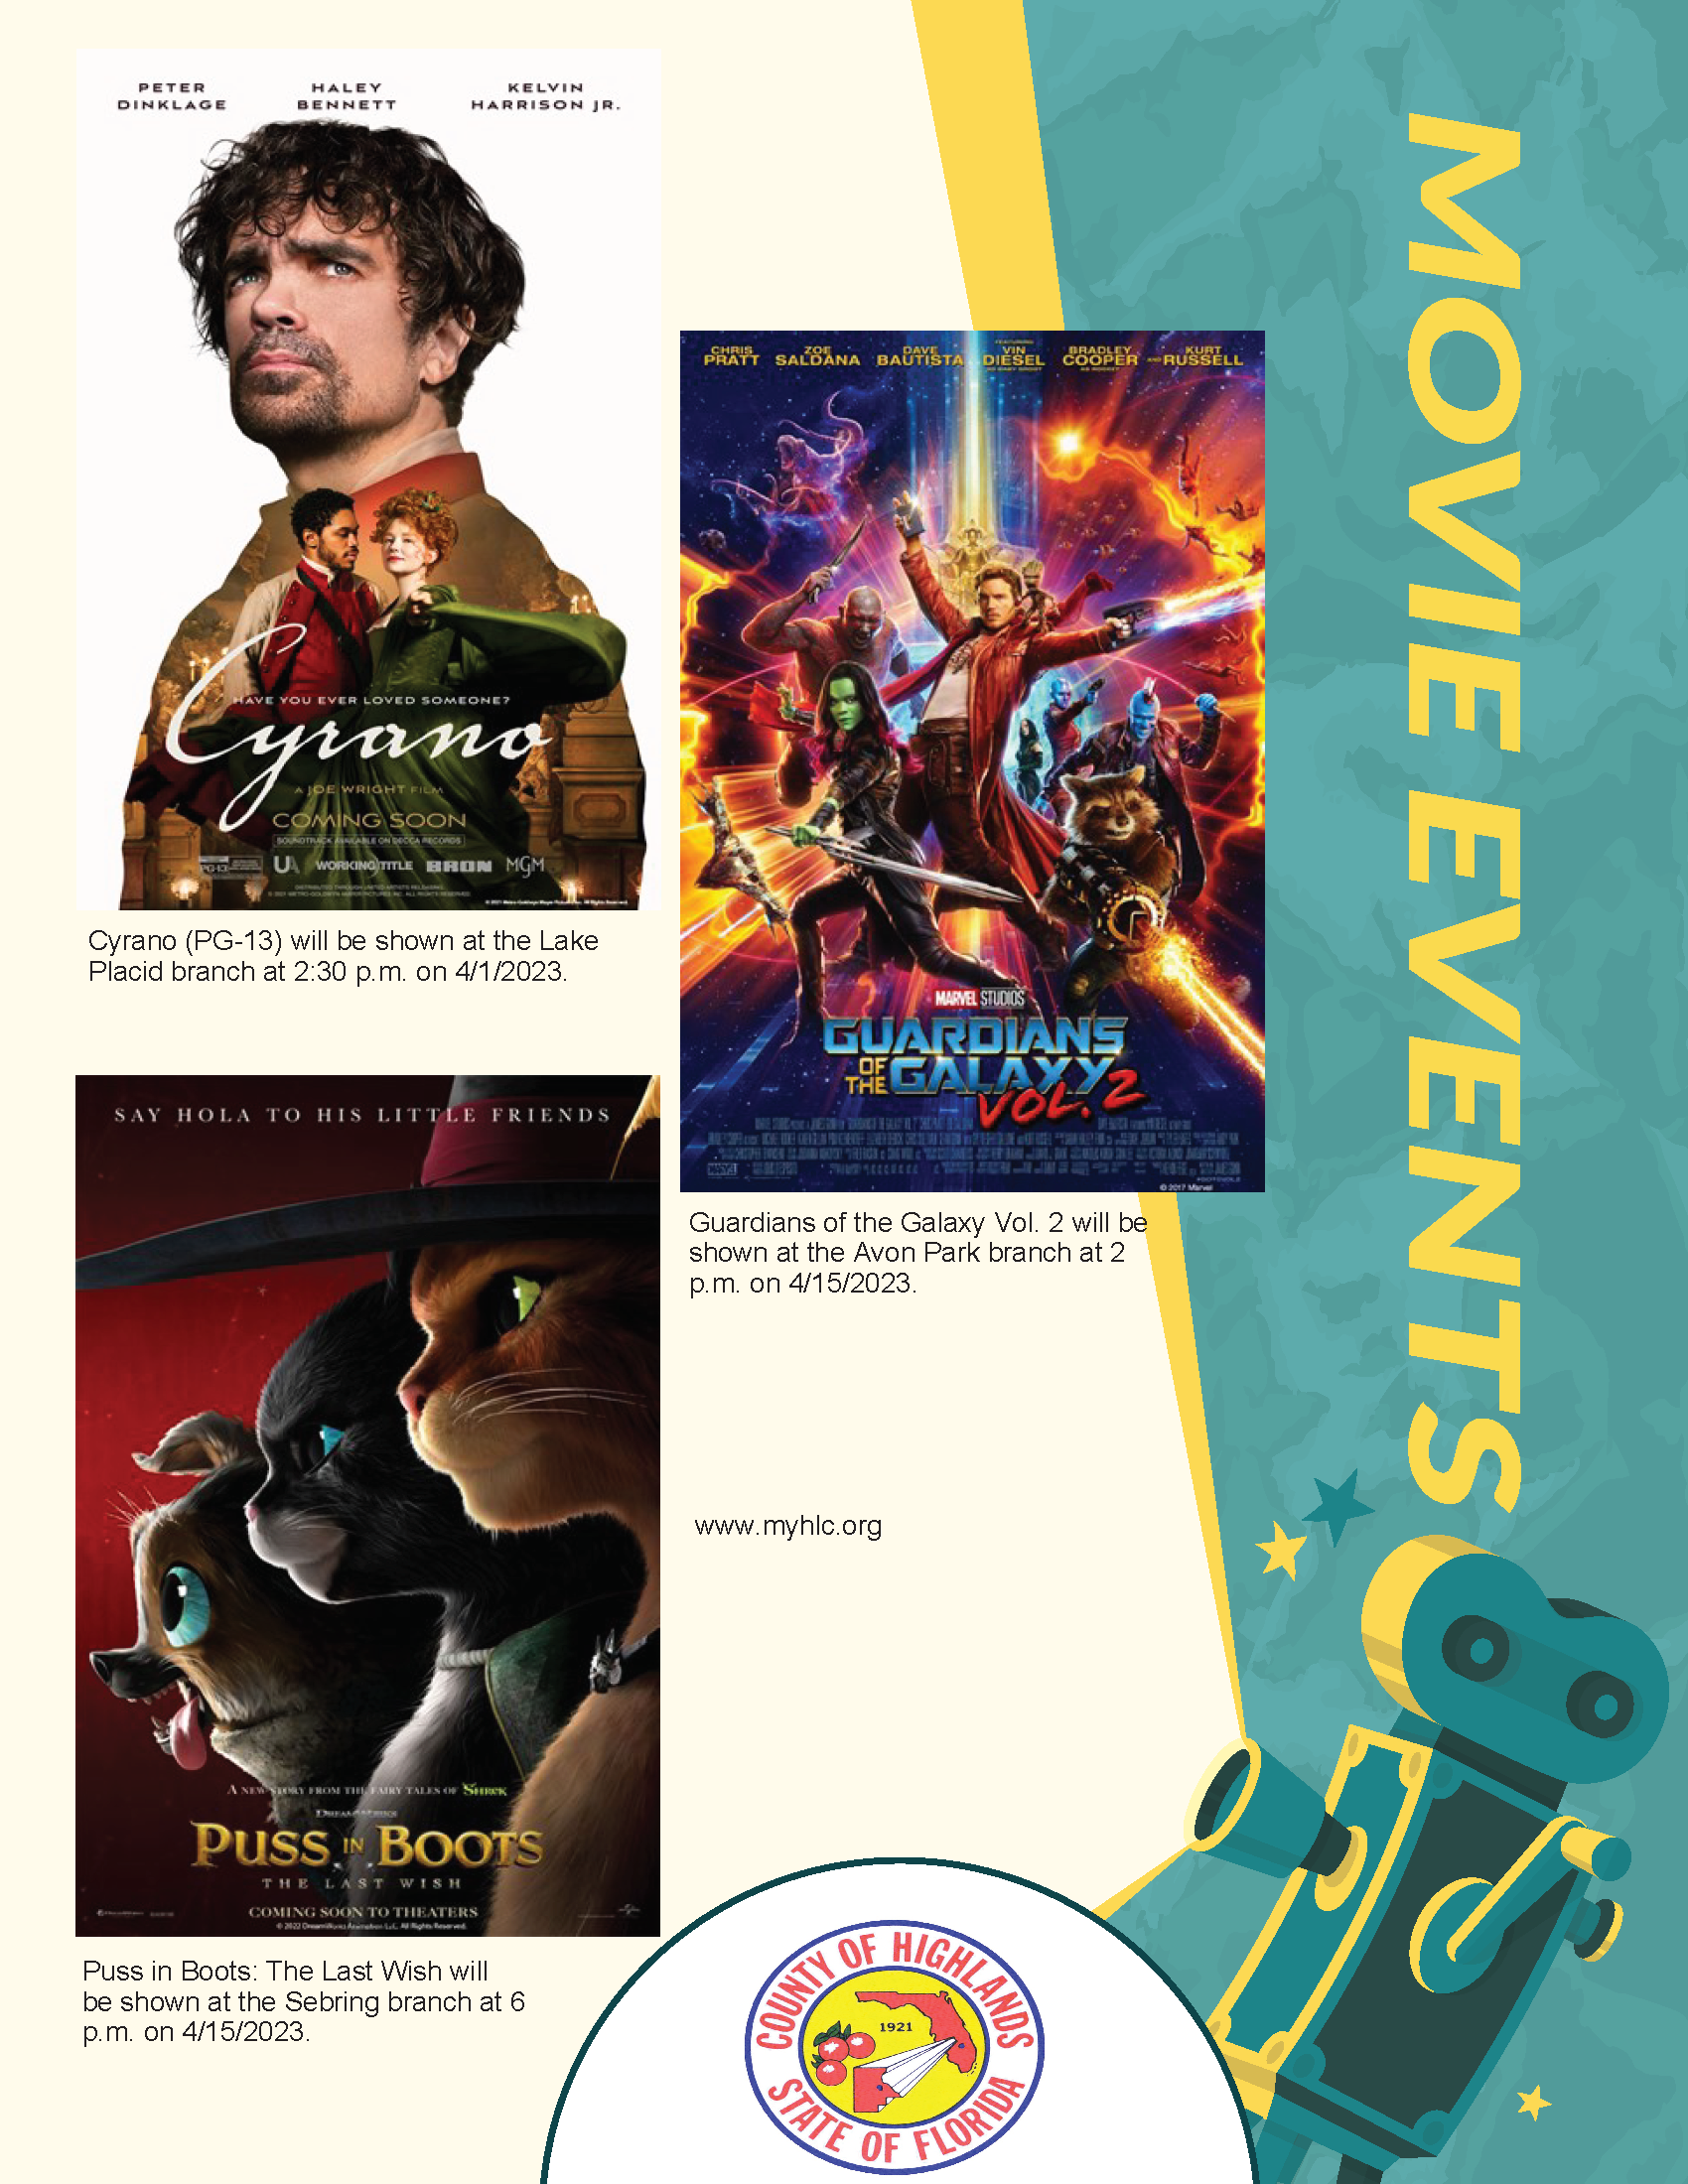 Highlands County April 2023 Movie Showings  Cyrano (PG-13) will be shown at the Lake Placid branch at 2:30 p.m. on April 1, 2023. Guardians of the Galaxy Vol. 2 (PG-13) will be shown at the Avon Park branch at 1 p.m. on April 15, 2023. Puss in Boots: The Last Wish (PG) will be shown at the Sebring branch at 6 p.m. on April 15, 2023. 